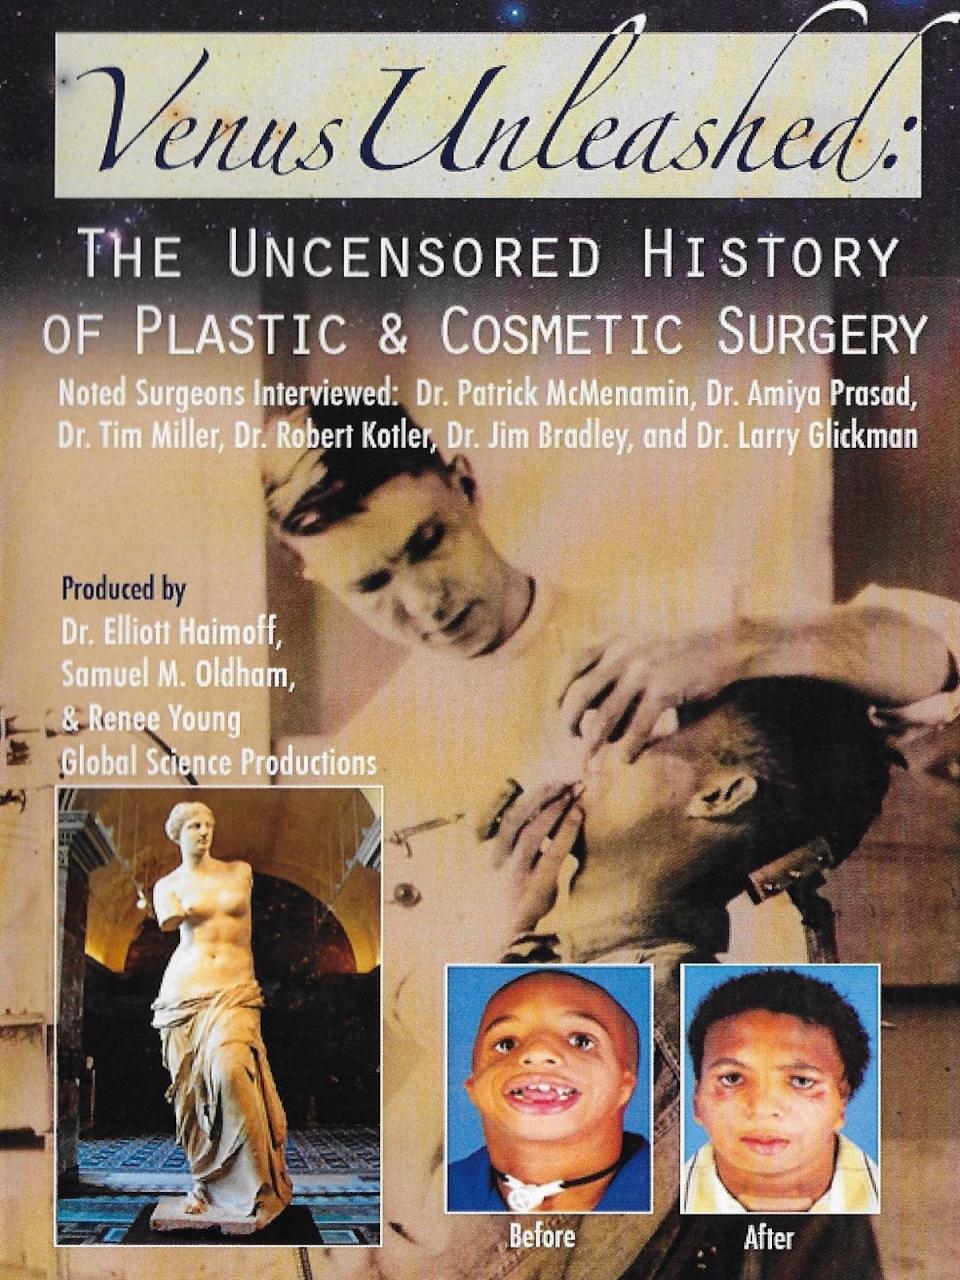 Venus Unleashed: The Uncensored History of Plastic & Cosmetic Surgery